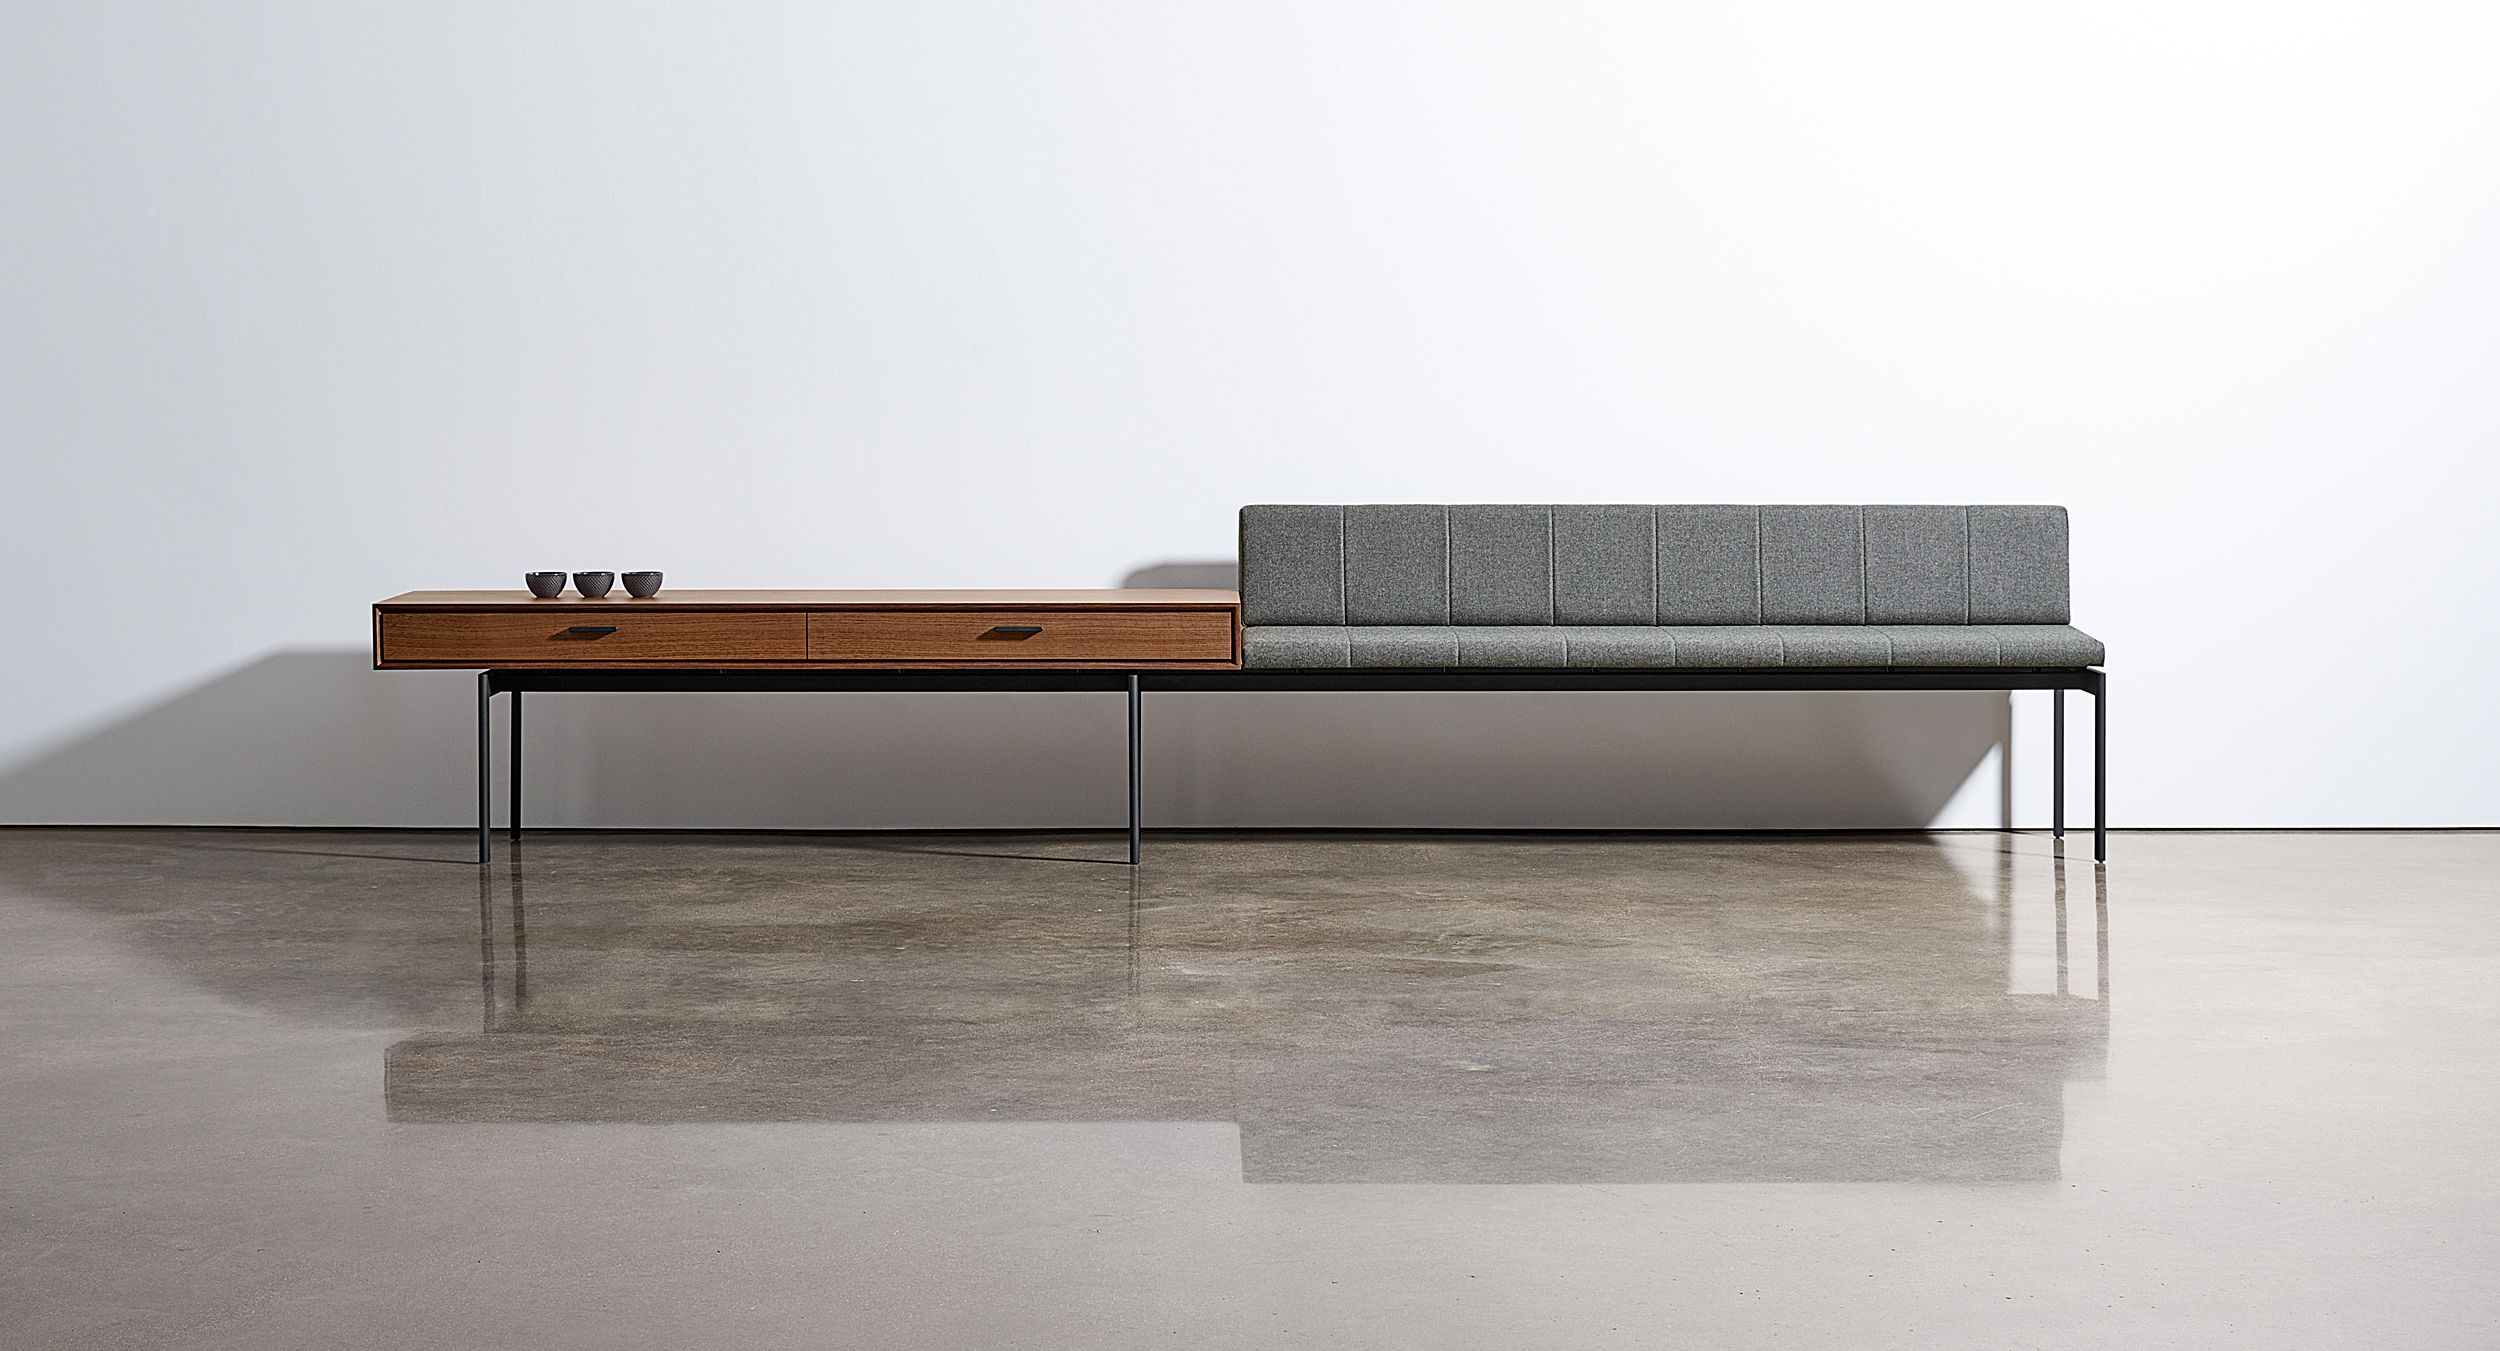 Halo seamlessly integrates gallery seating with storage elements.